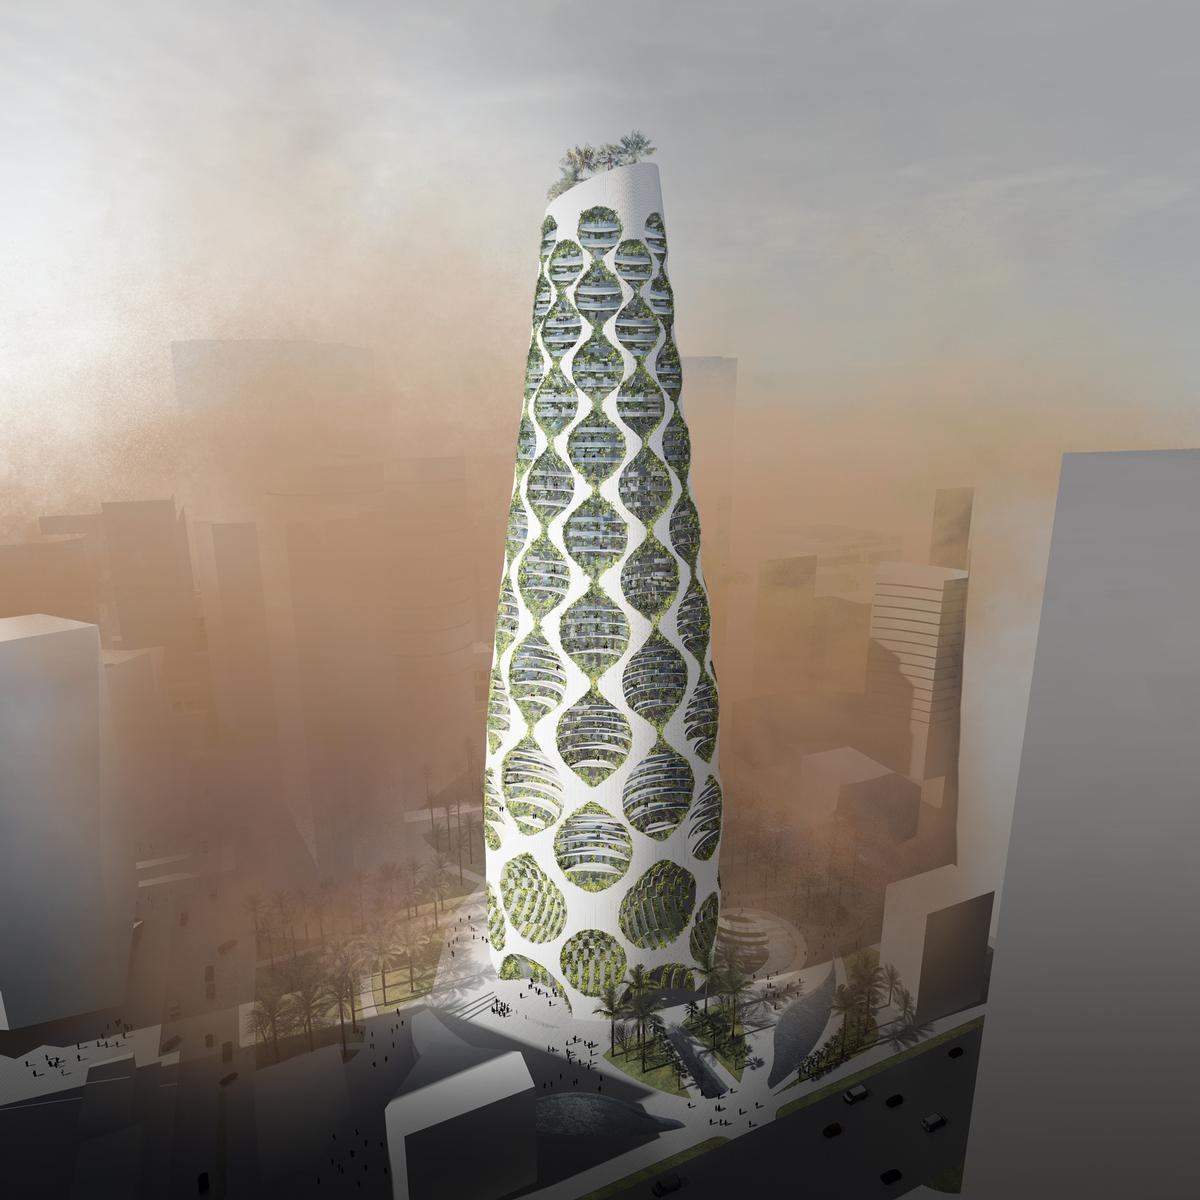 The tower would feature 59 above- and below-ground levels spread across a height of 220m (722ft) / FAAB Architektura